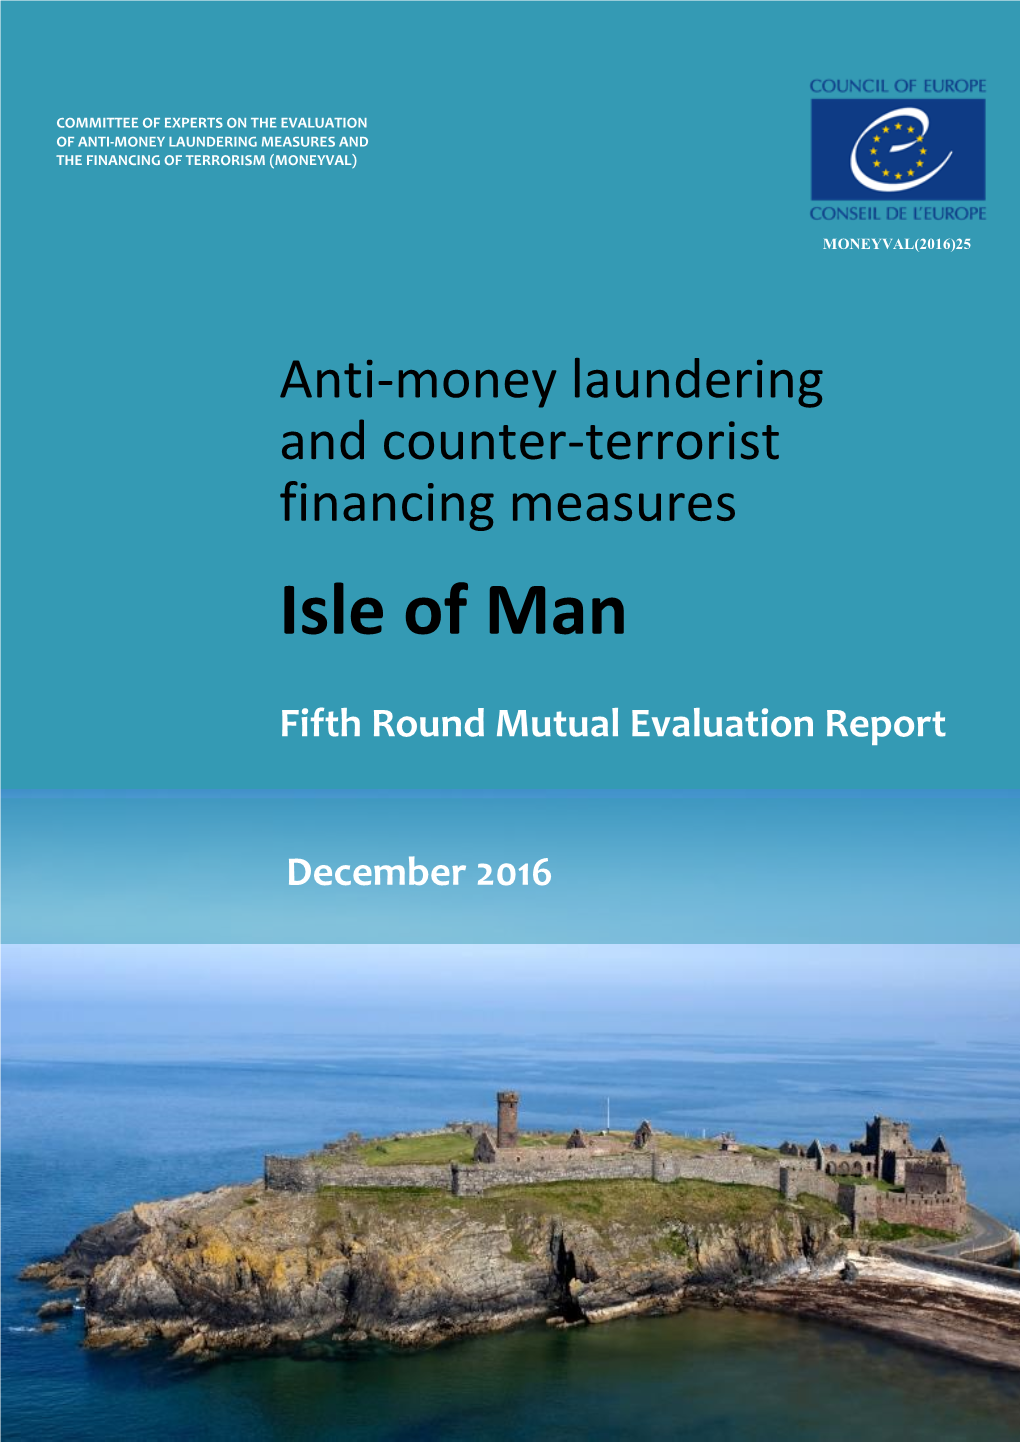 Fifth Round Mutual Evaluation Report of the Isle Of